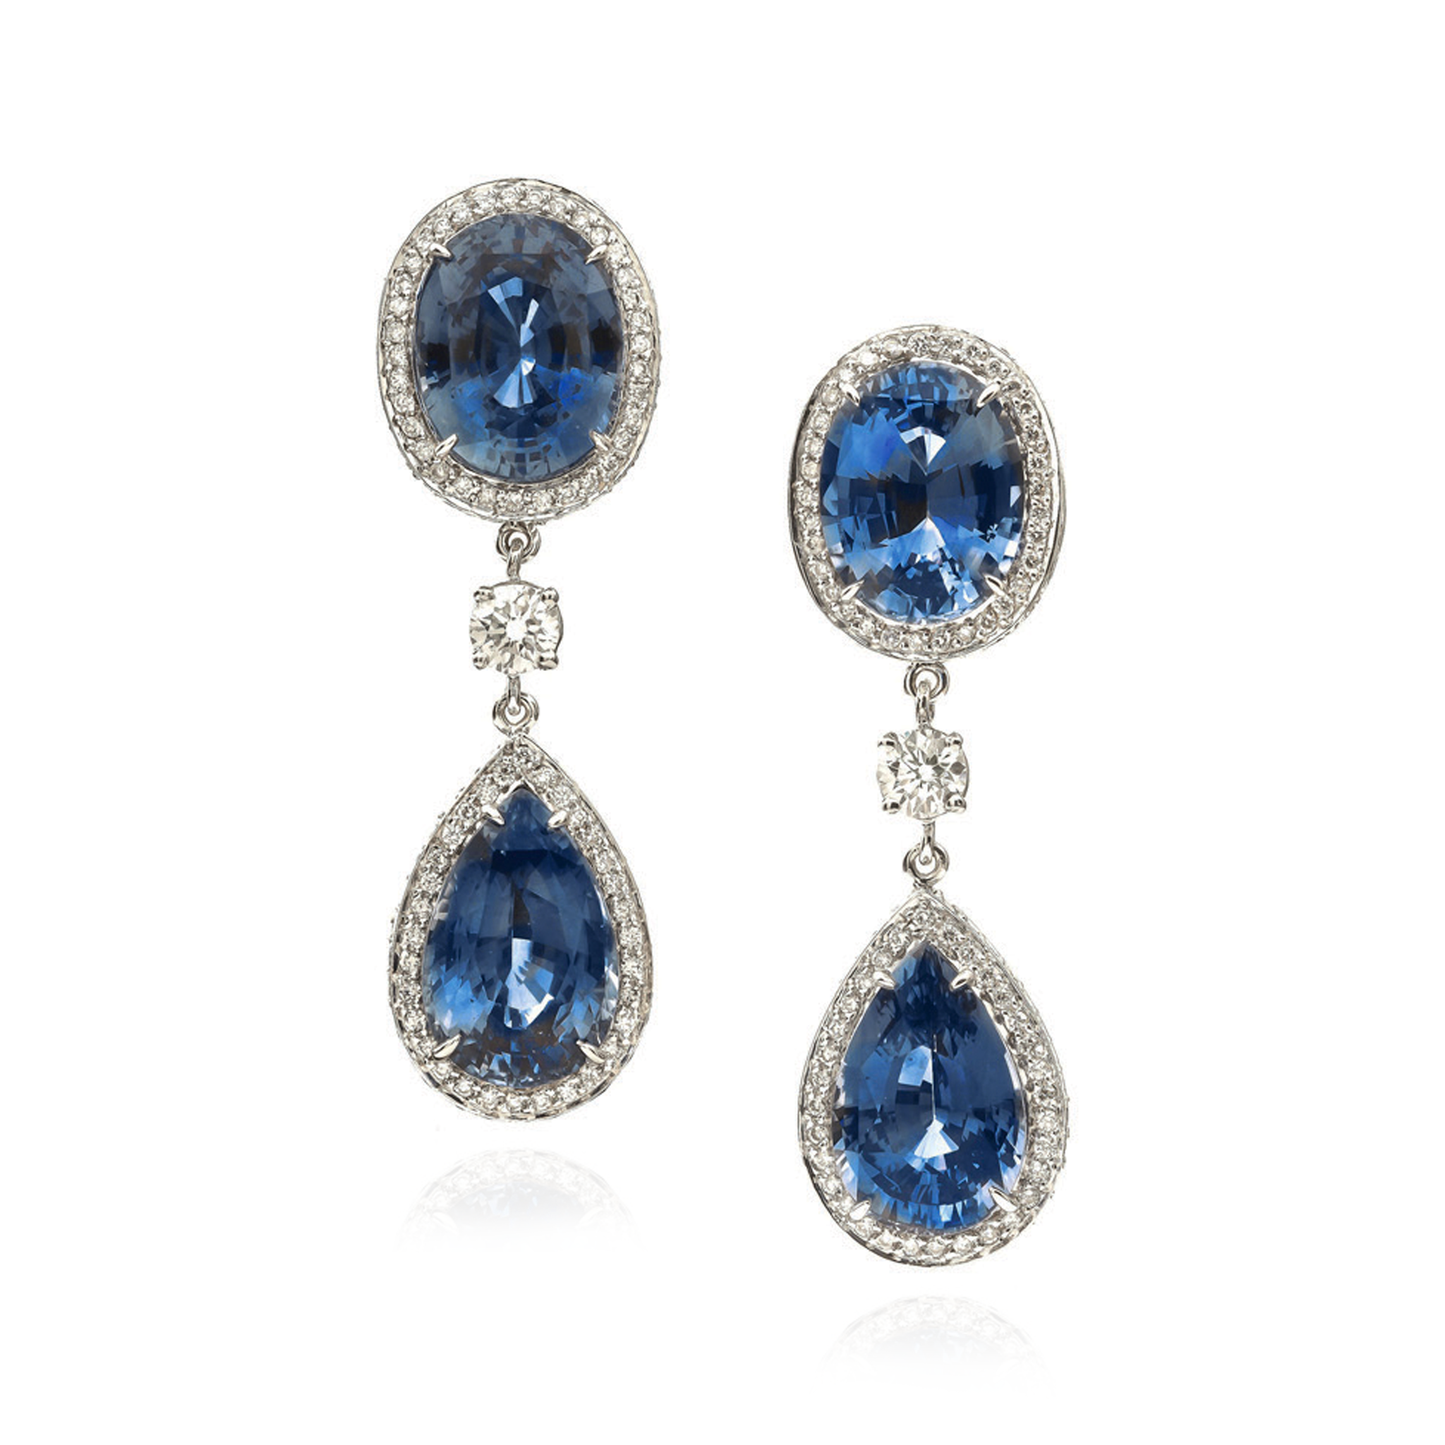 18K White Gold Earrings with Blue Sapphires